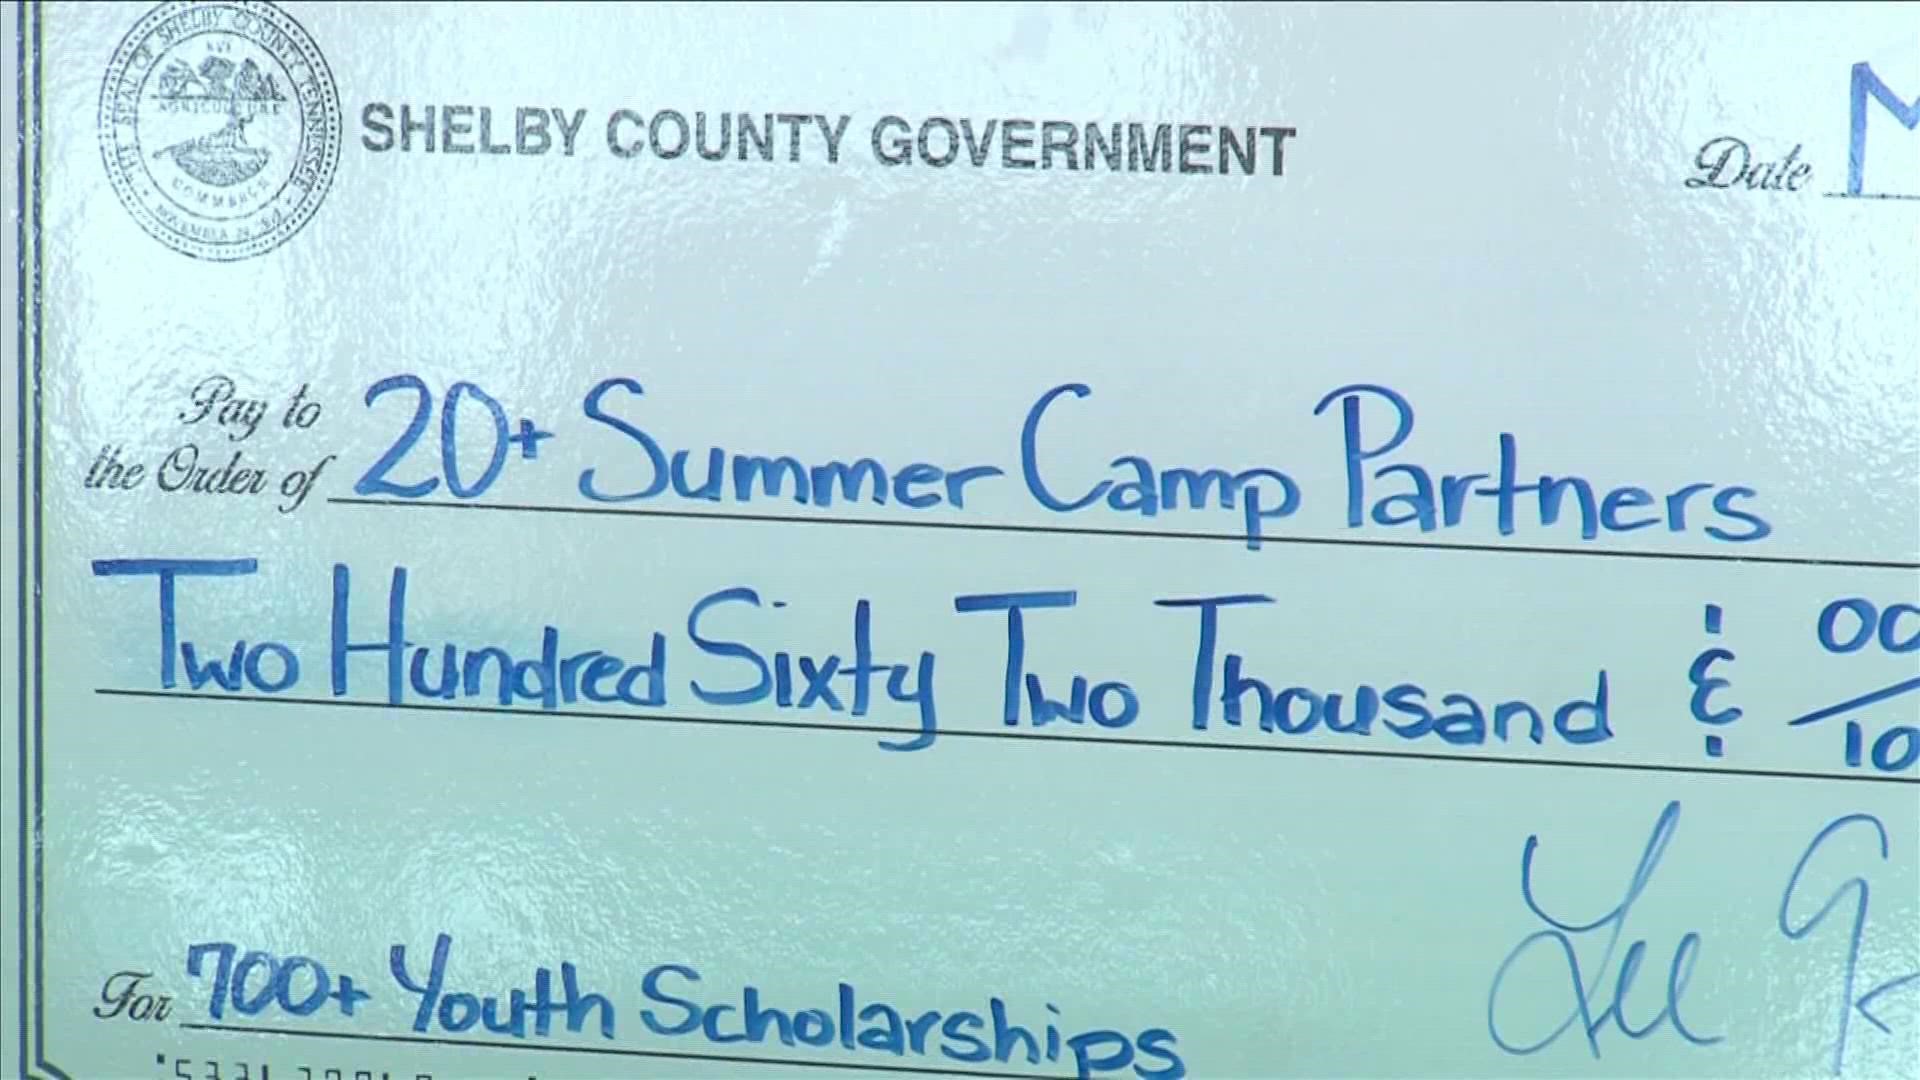 Tuesday, Mayor Lee Harris announced its partners for the first-ever Youth Summer Camp Scholarship Program.